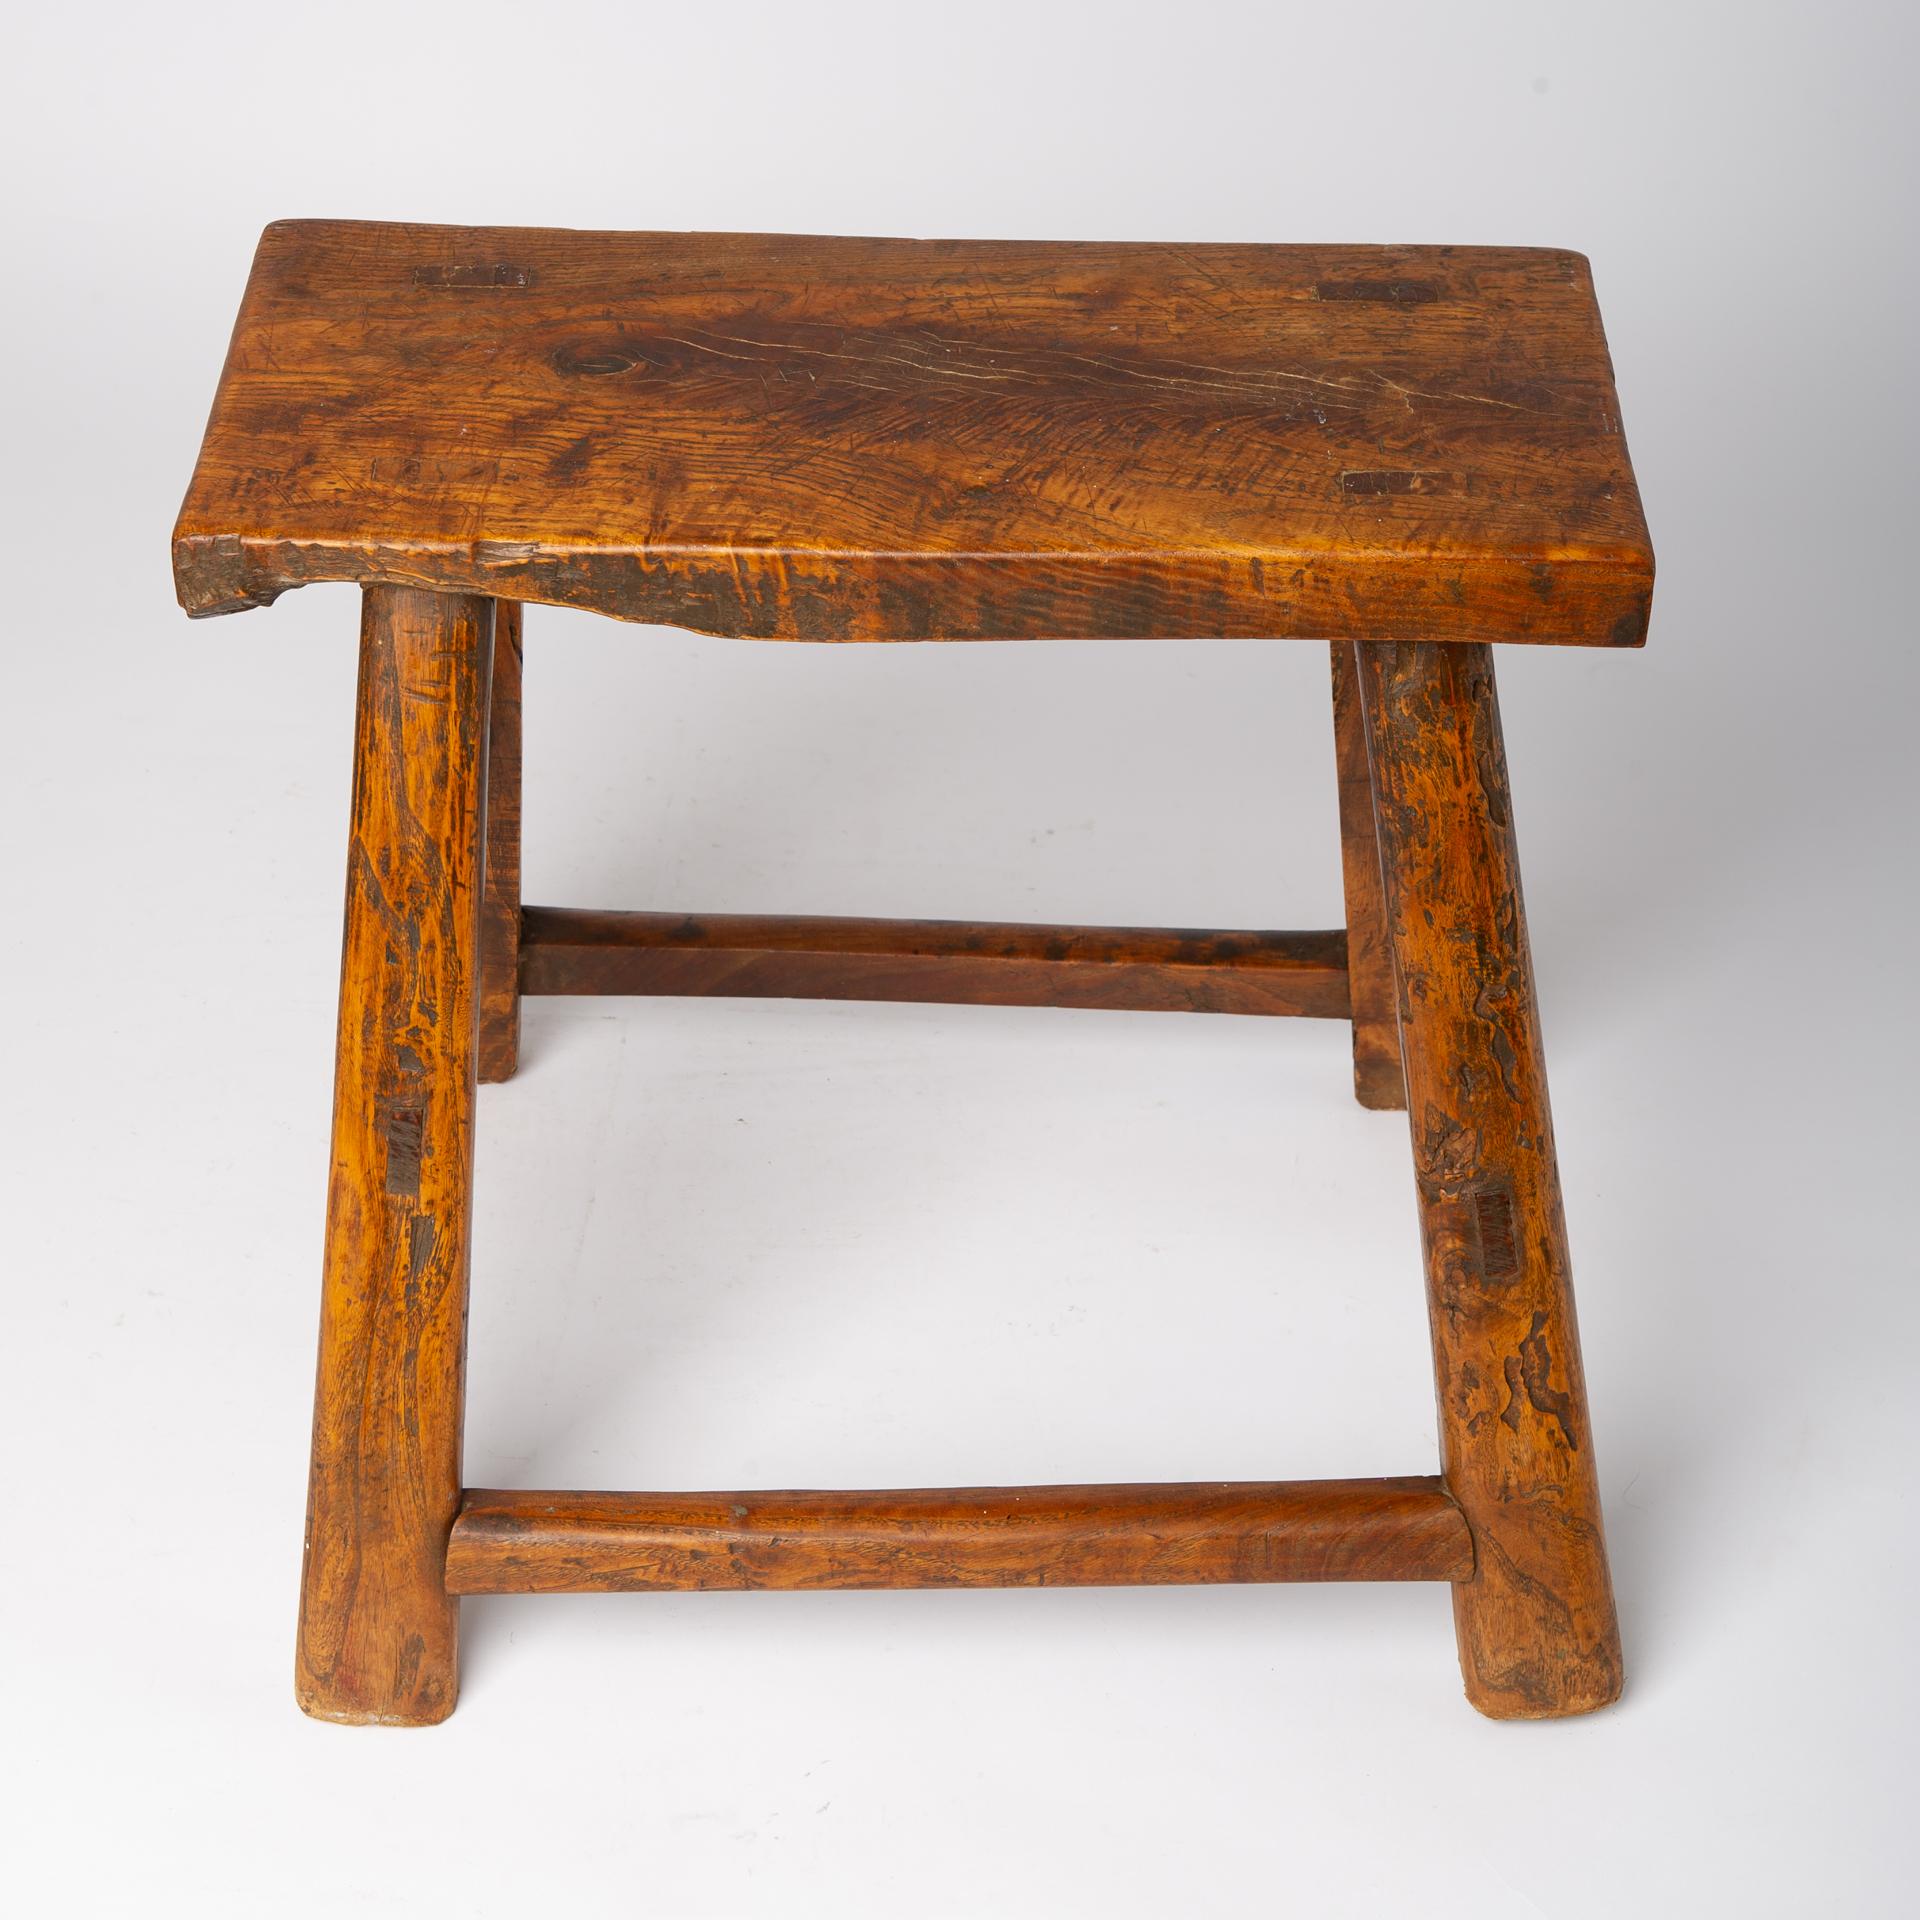 M/1346 - Vintage wooden rustic rectangular stool in hardwood (like that one I published round) - Very solid. 
Footprint of the legs is cm. 53 x 47. -
Indispensable for Your porch or garden.